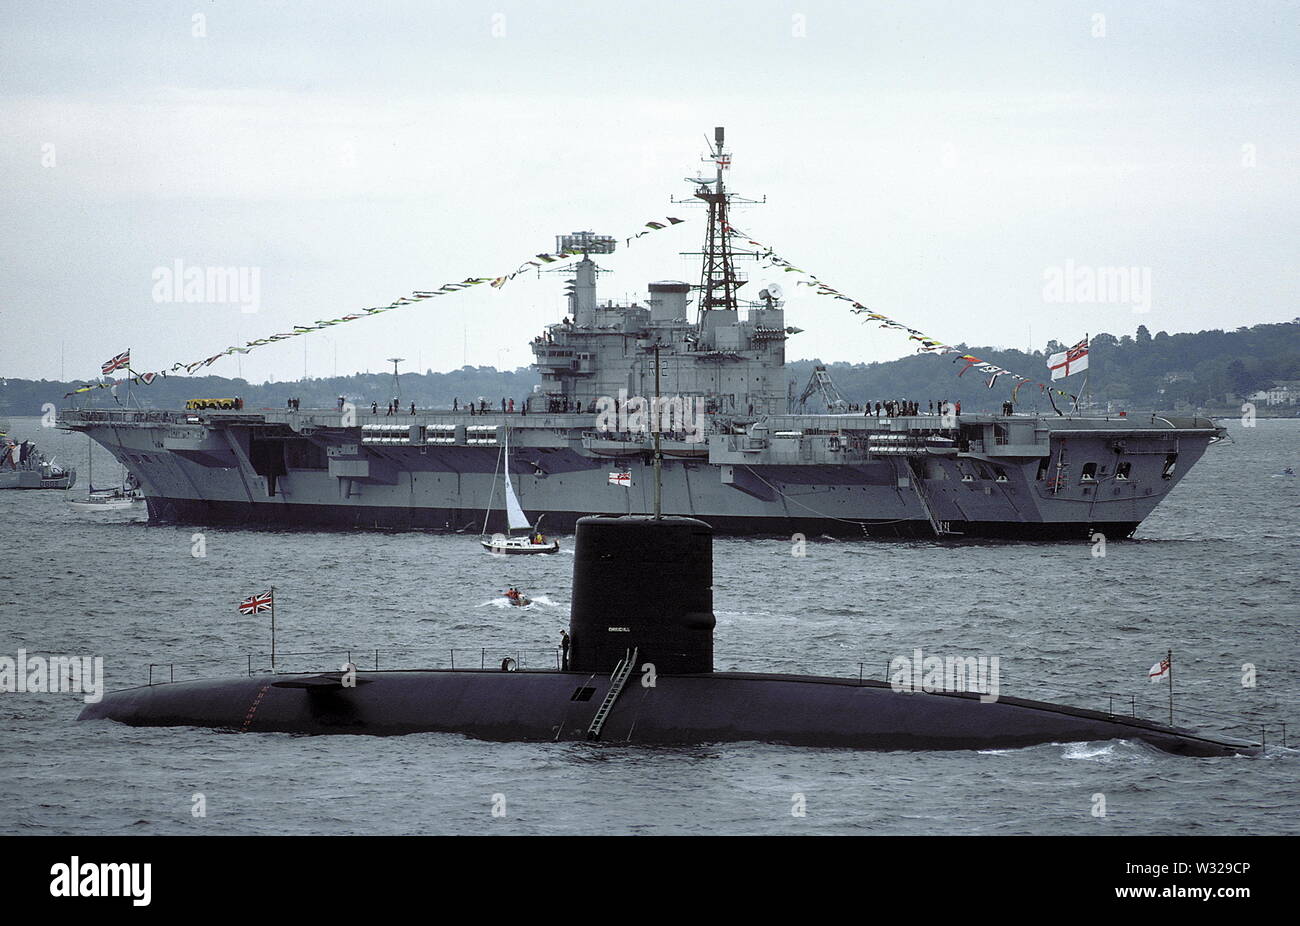 AJAXNETPHOTO. 1977. SPITHEAD, ENGLAND - NUCLEAR POWER - HMS CHURCHILL, 4,900 TONS, COMPLETED IN 1970, WAS ONE OF THE FIRST ALL NUCLEAR POWERED SUBMARINES IN THE BRITISH ROYAL NAVY. SEEN HERE AT THE SILVER JUBILEE FLEET REVIEW; IN THE BACKGROUND IS THE AIRCRAFT CARRIER HMS HERMES.  PHOTO:JONATHAN EASTLANDAJAX.  REF:CD21207 1 91. Stock Photo